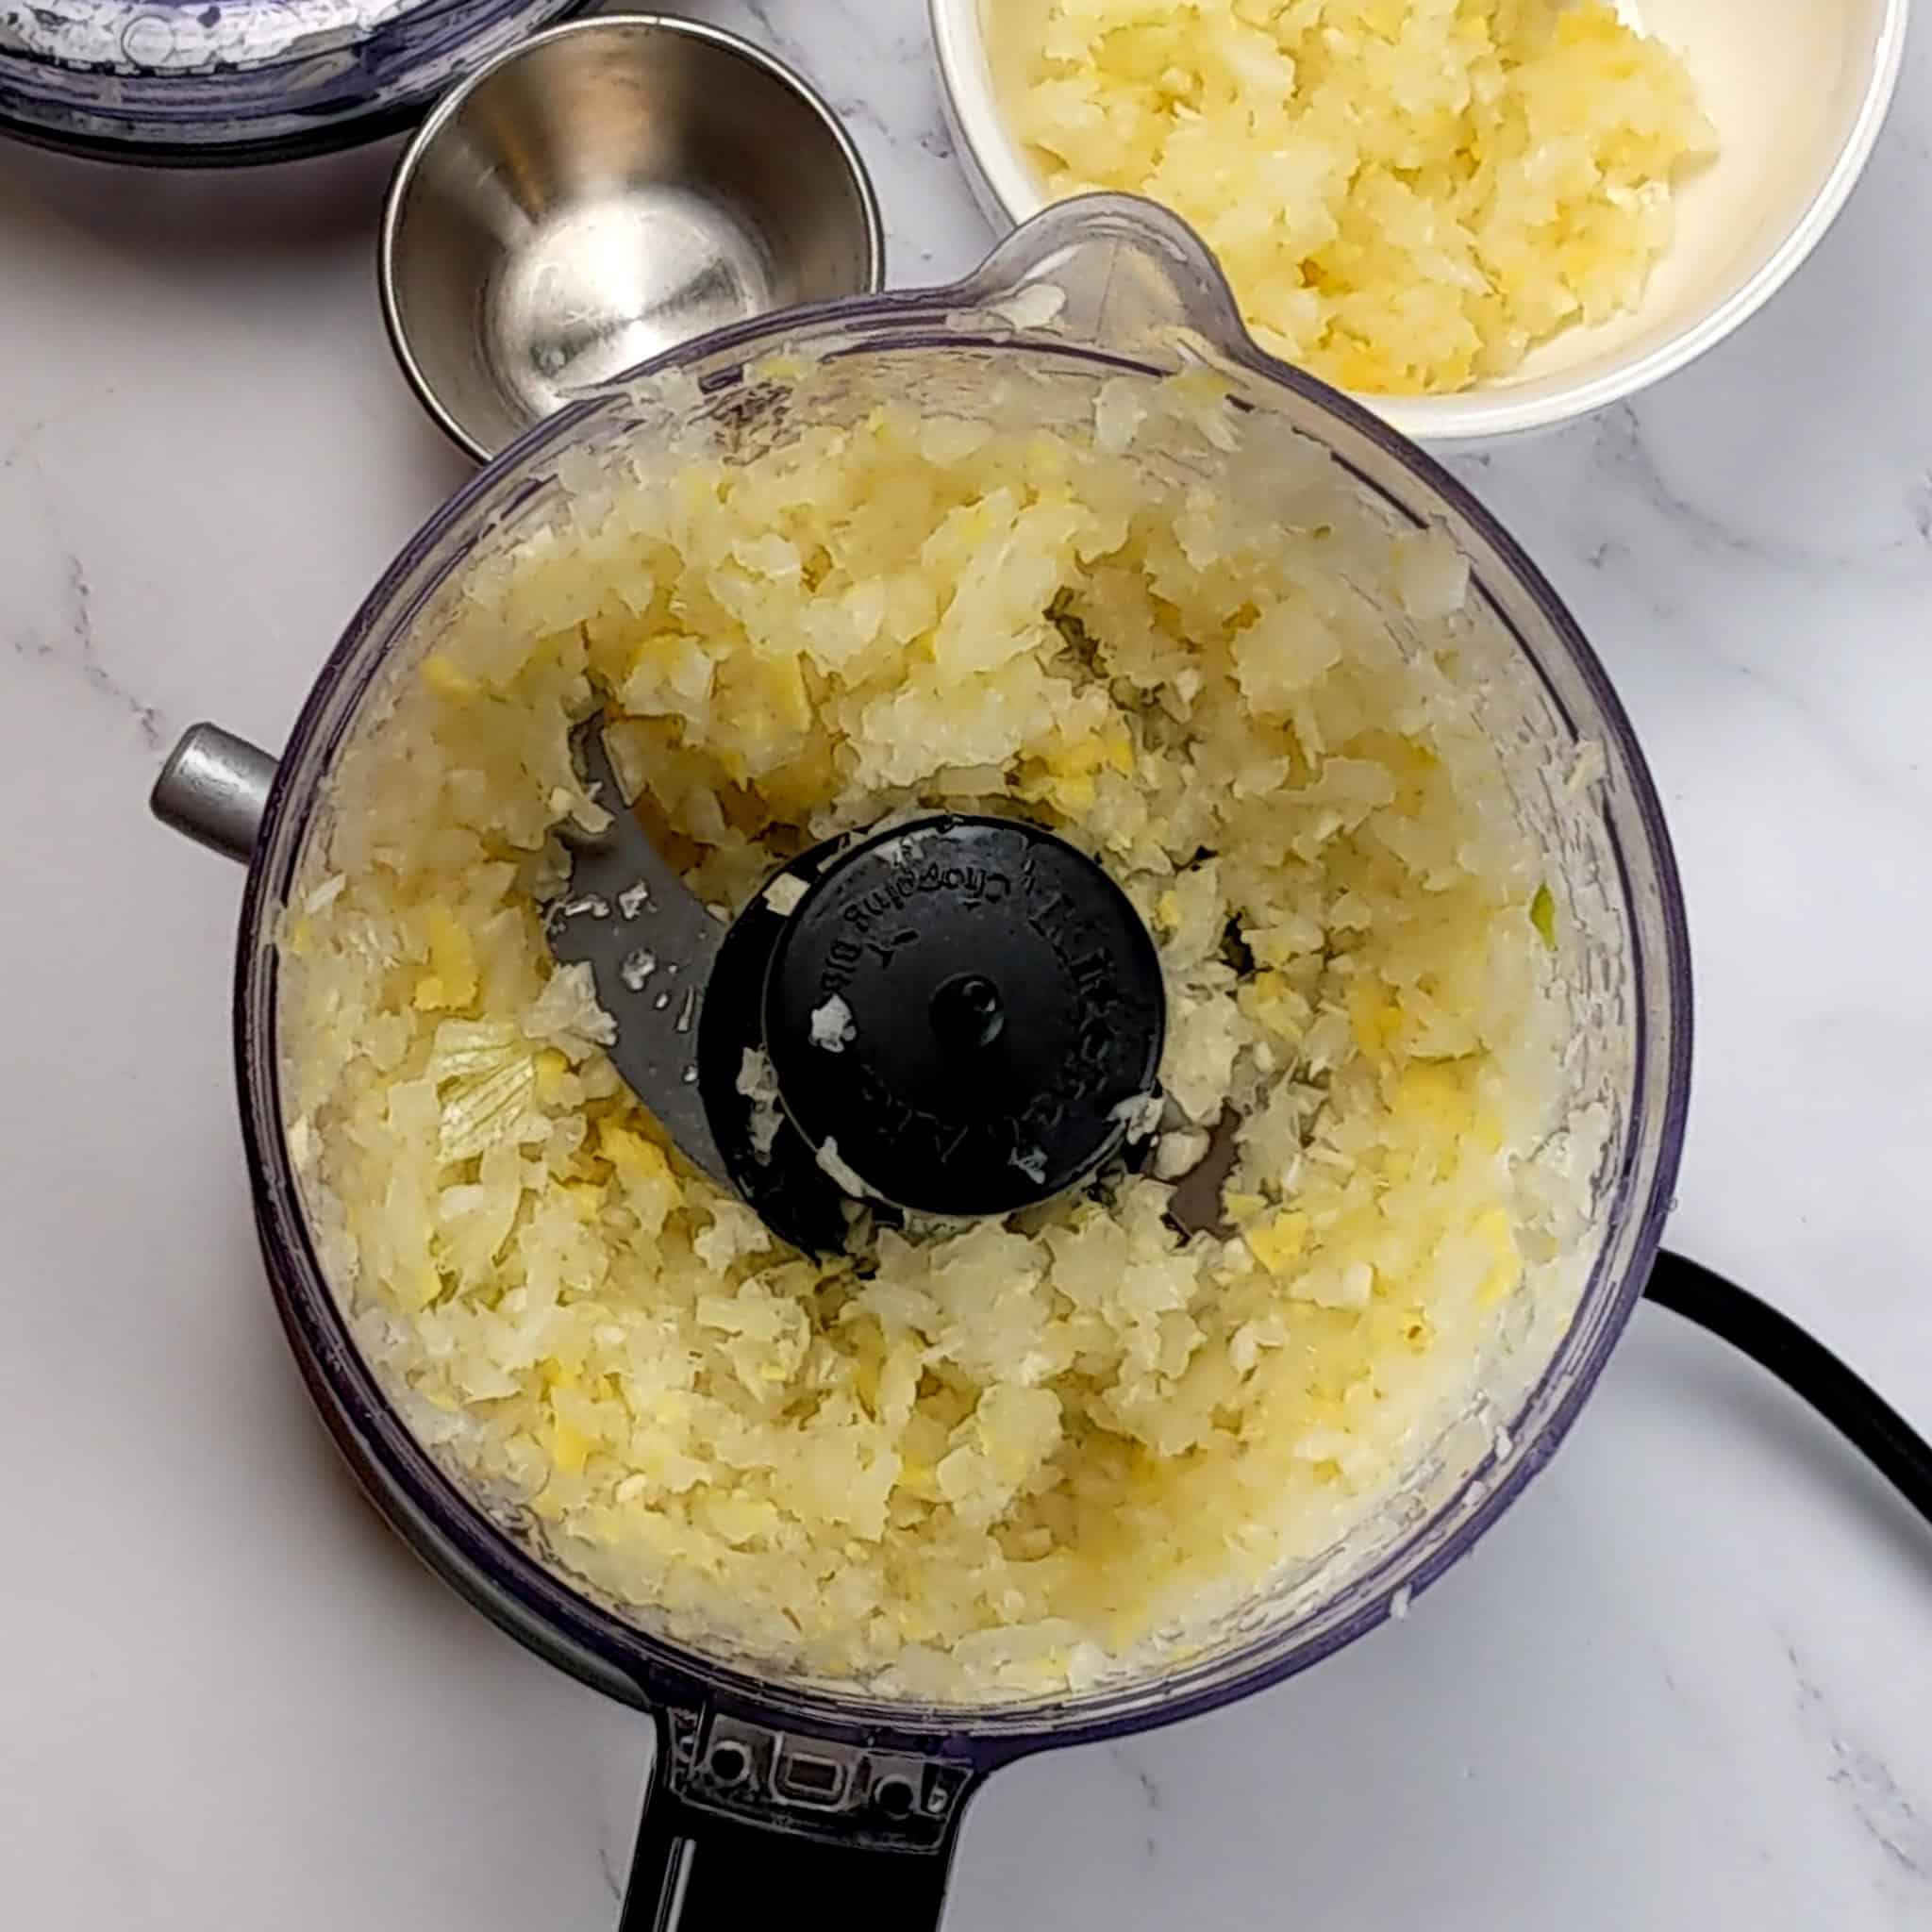 kitchenaid food processor with chopped ginger, garlic and onion.